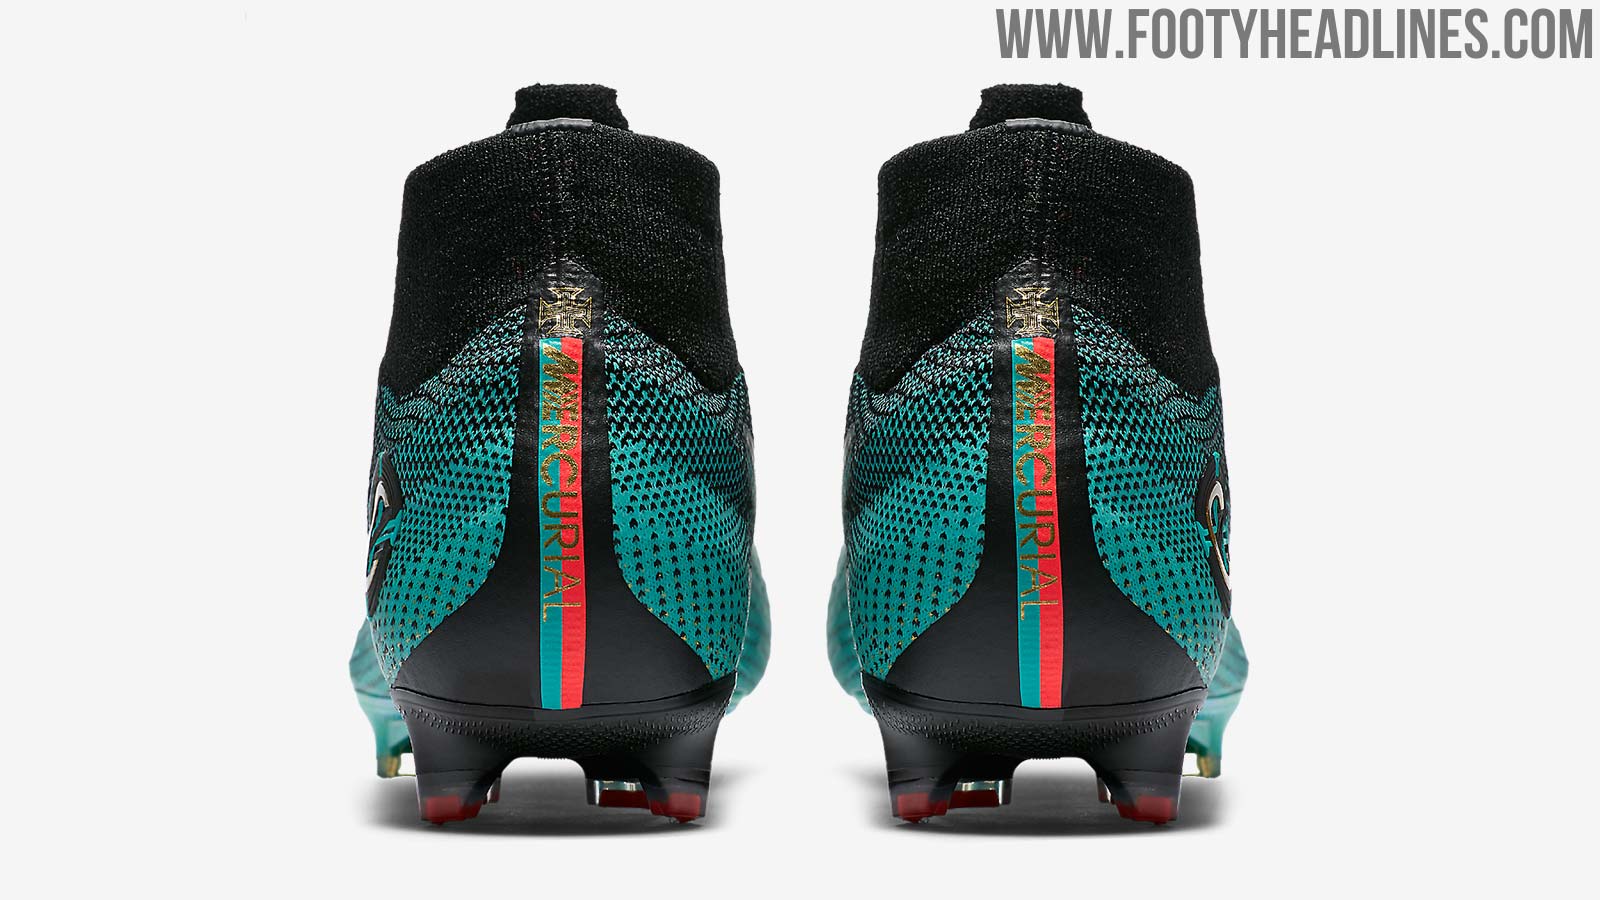 Nike Mercurial Superfly 360 Cristiano Ronaldo 6 Born Boots Released - Footy